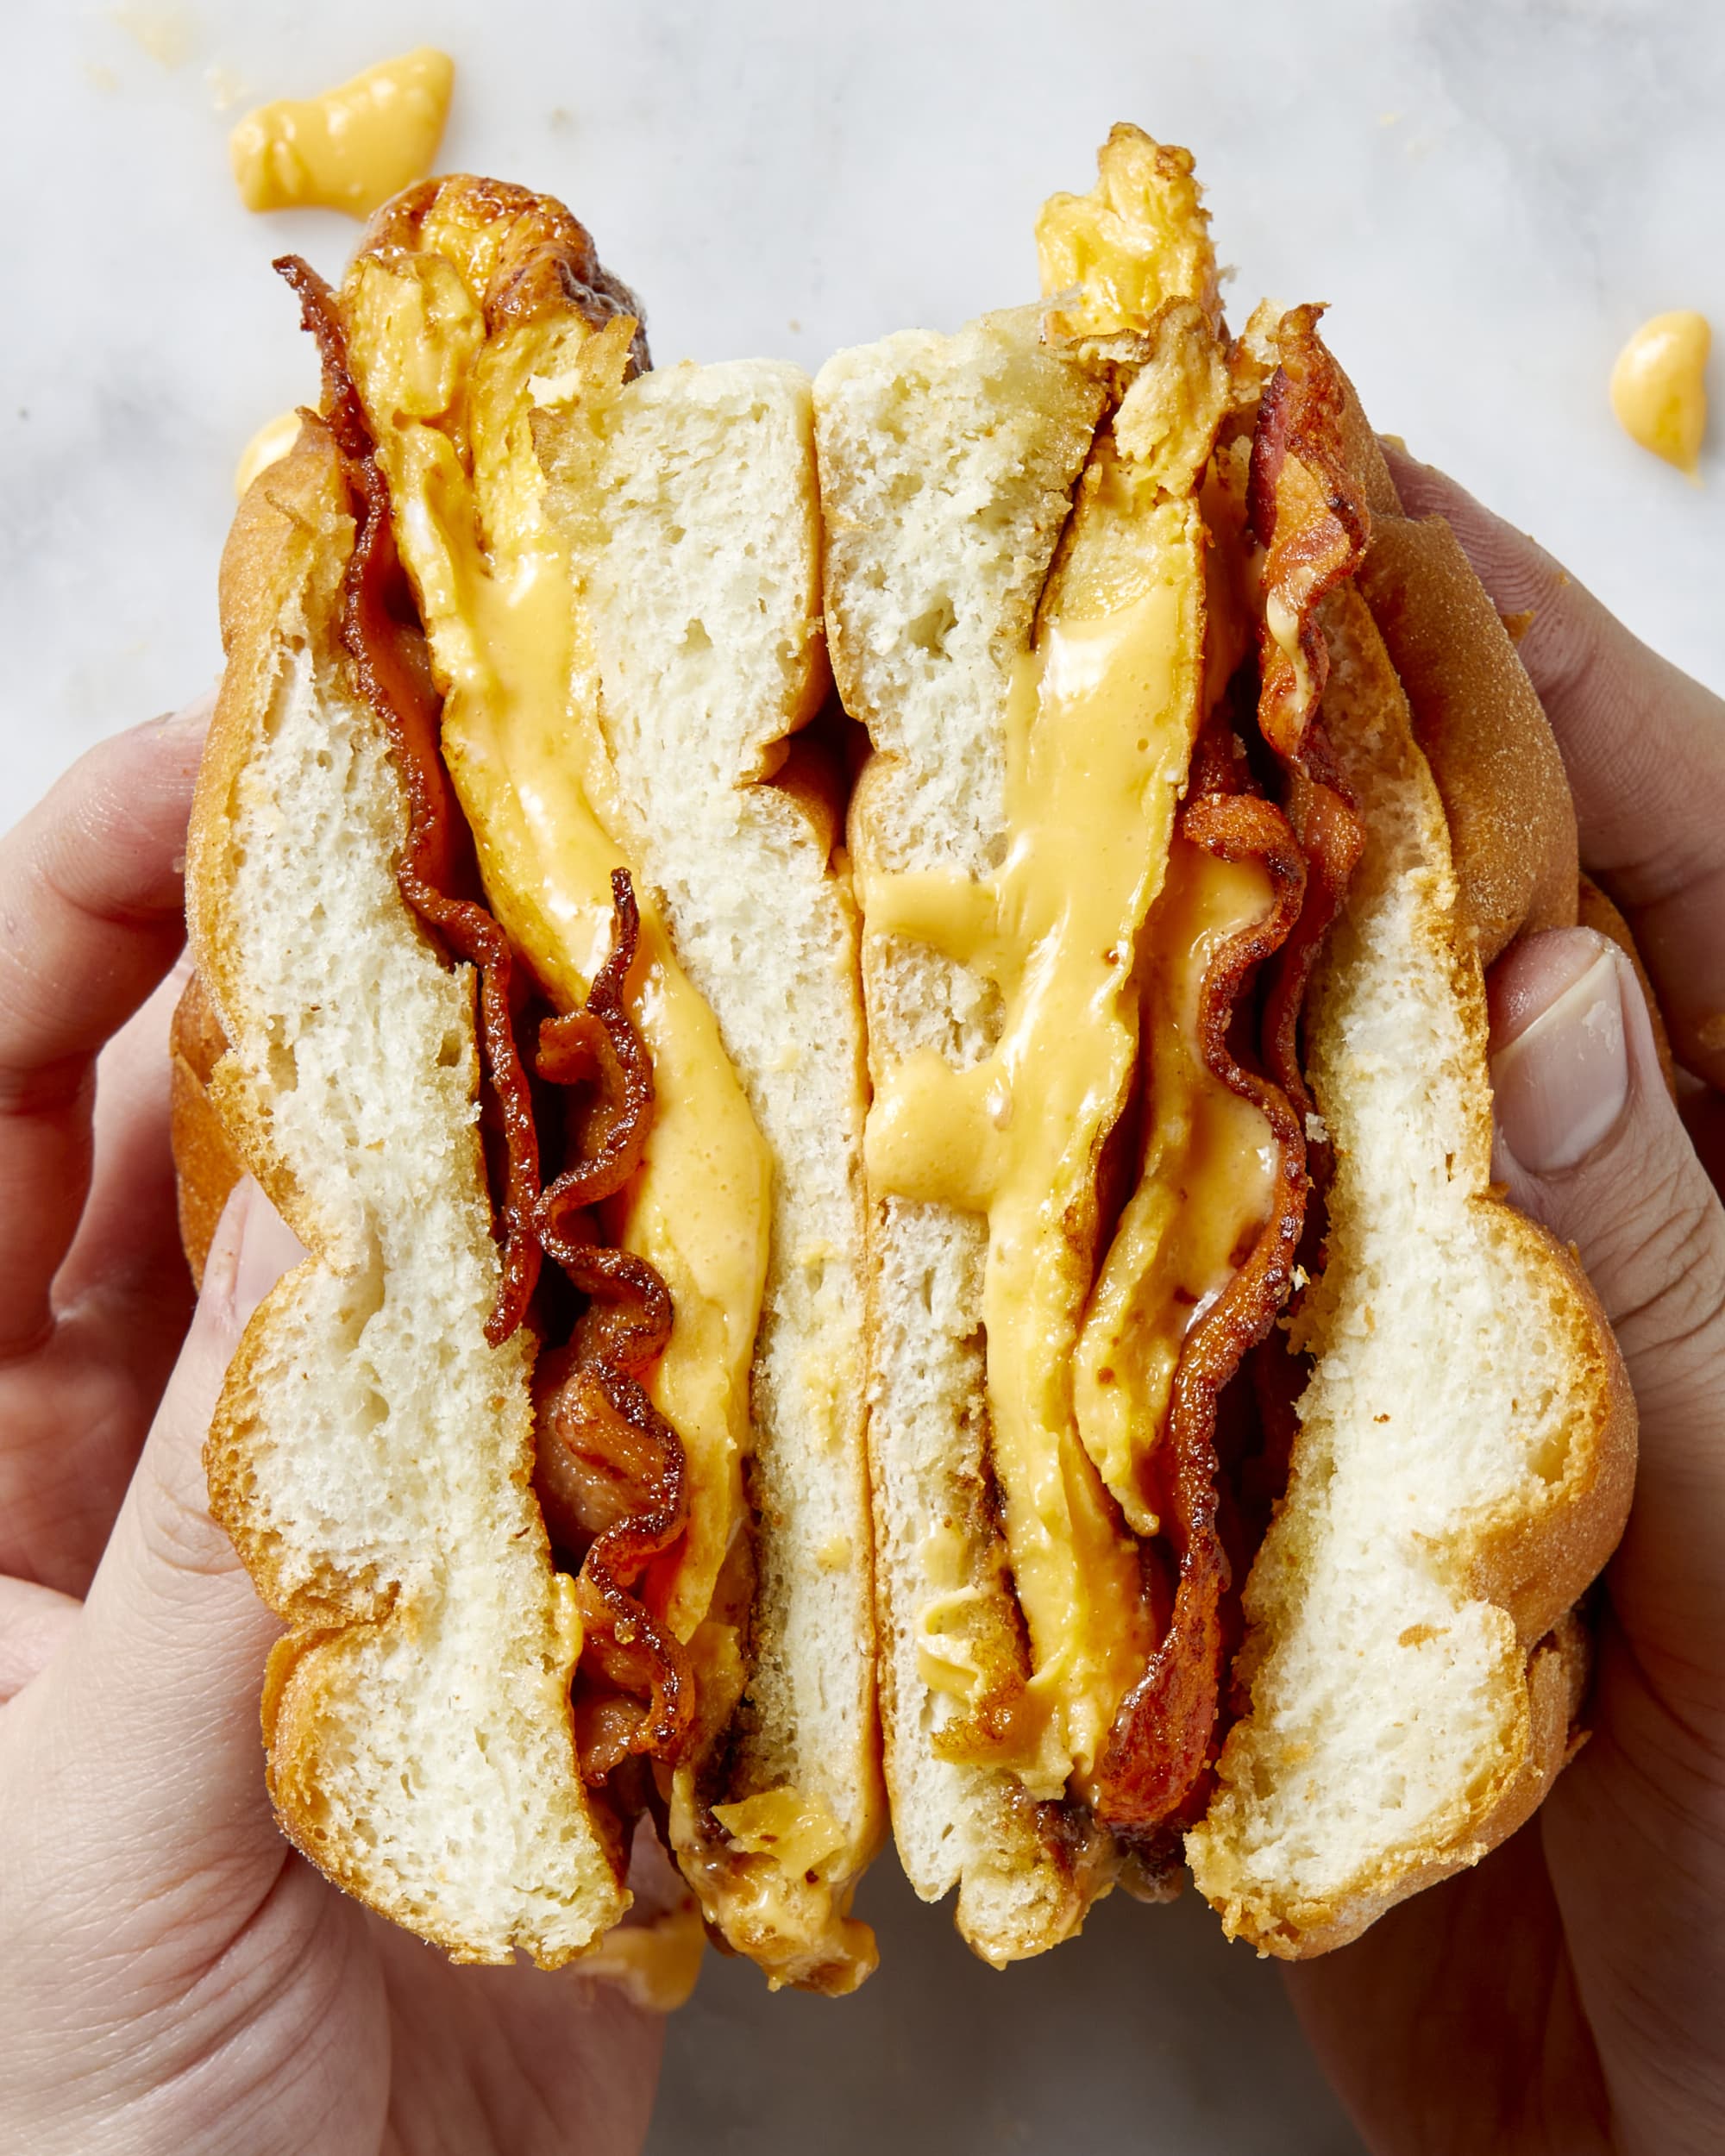 https://cdn.apartmenttherapy.info/image/upload/v1696613491/k/Photo/Recipes/2023-10-bacon-egg-and-cheese/bacon-egg-and-cheese-353.jpg